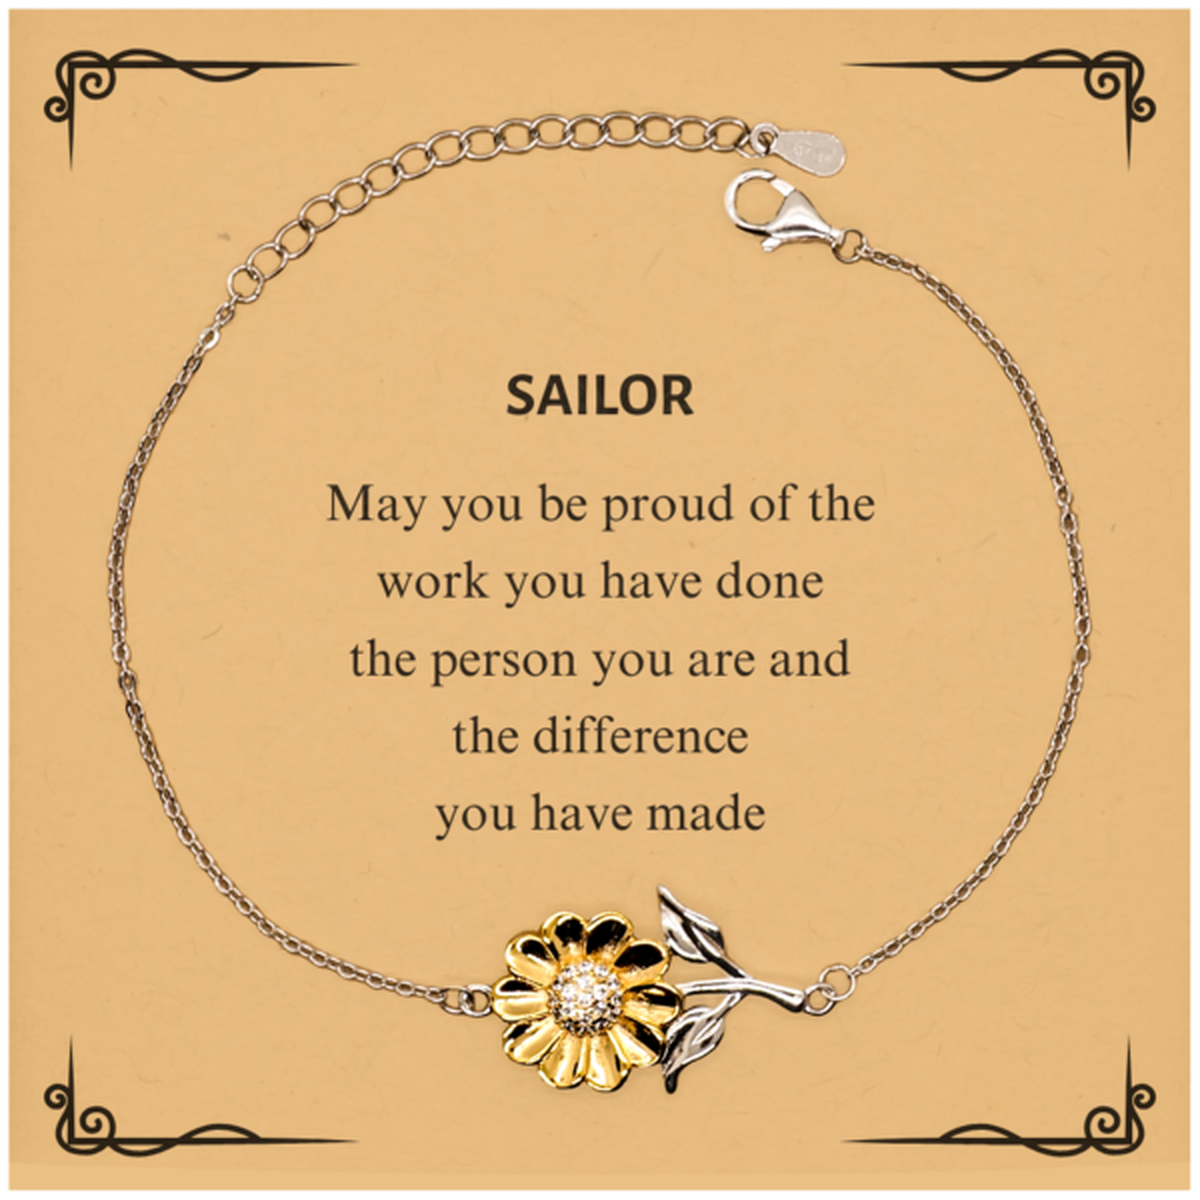 Sailor May you be proud of the work you have done, Retirement Sailor Sunflower Bracelet for Colleague Appreciation Gifts Amazing for Sailor